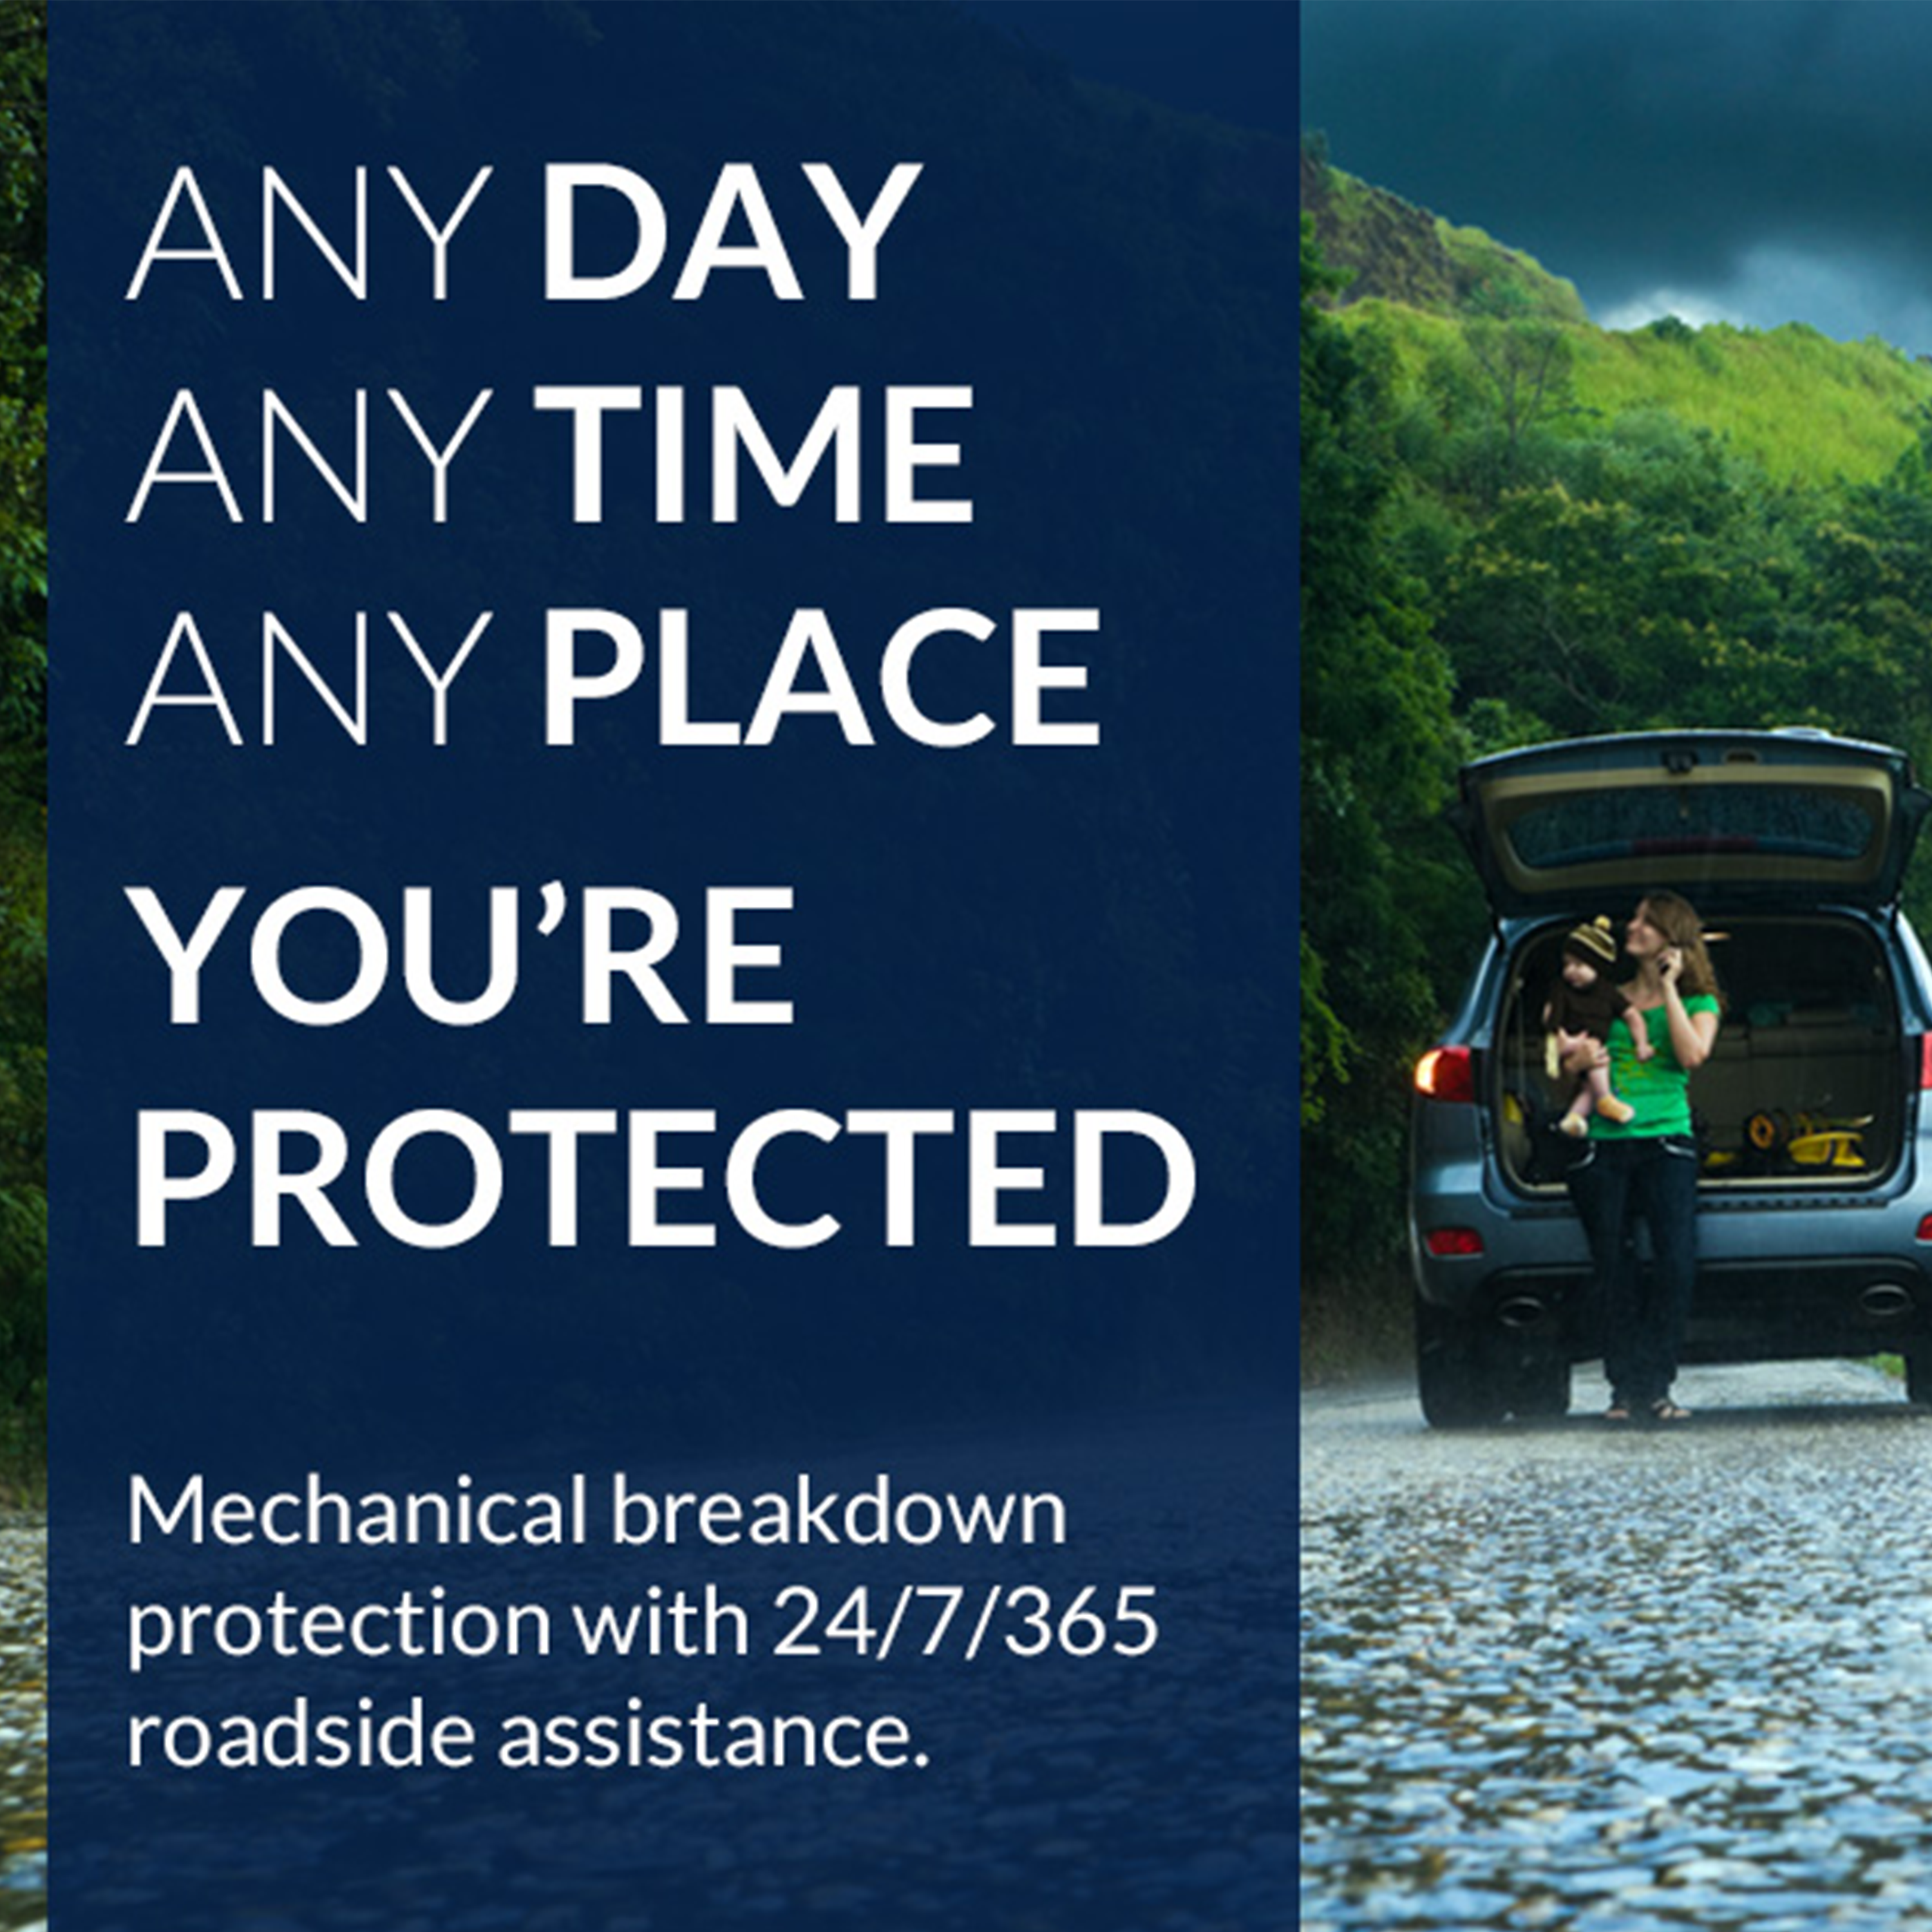 Any day, any time, any place, you're protected. Mechanical breakdown protection with 24/7/365 roadside assistance.